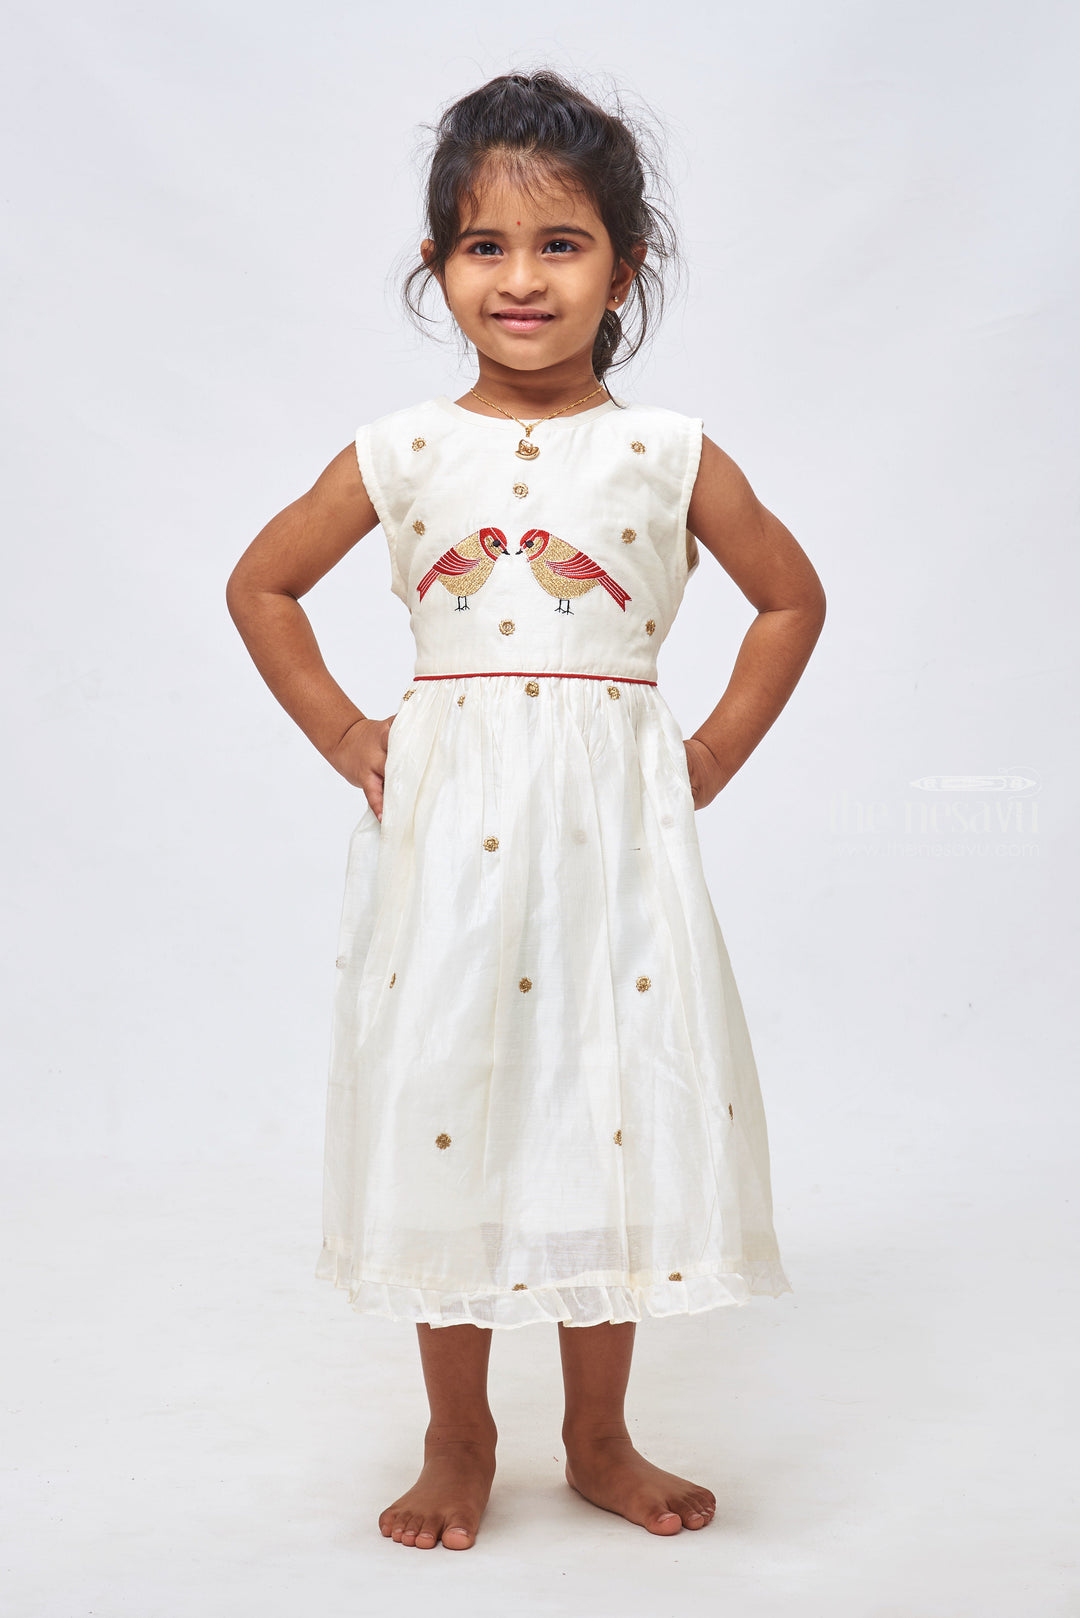 The Nesavu Girls Cotton Frock Pure White Delight: Resham Embroidered Sleeveless Chanderi Frock for Girls Nesavu 16 (1Y) / White / Chanderi GFC1141A-16 Elegant Resham Embroidered White Chanderi Frock | Perfect for Special Occasions | the Nesavu